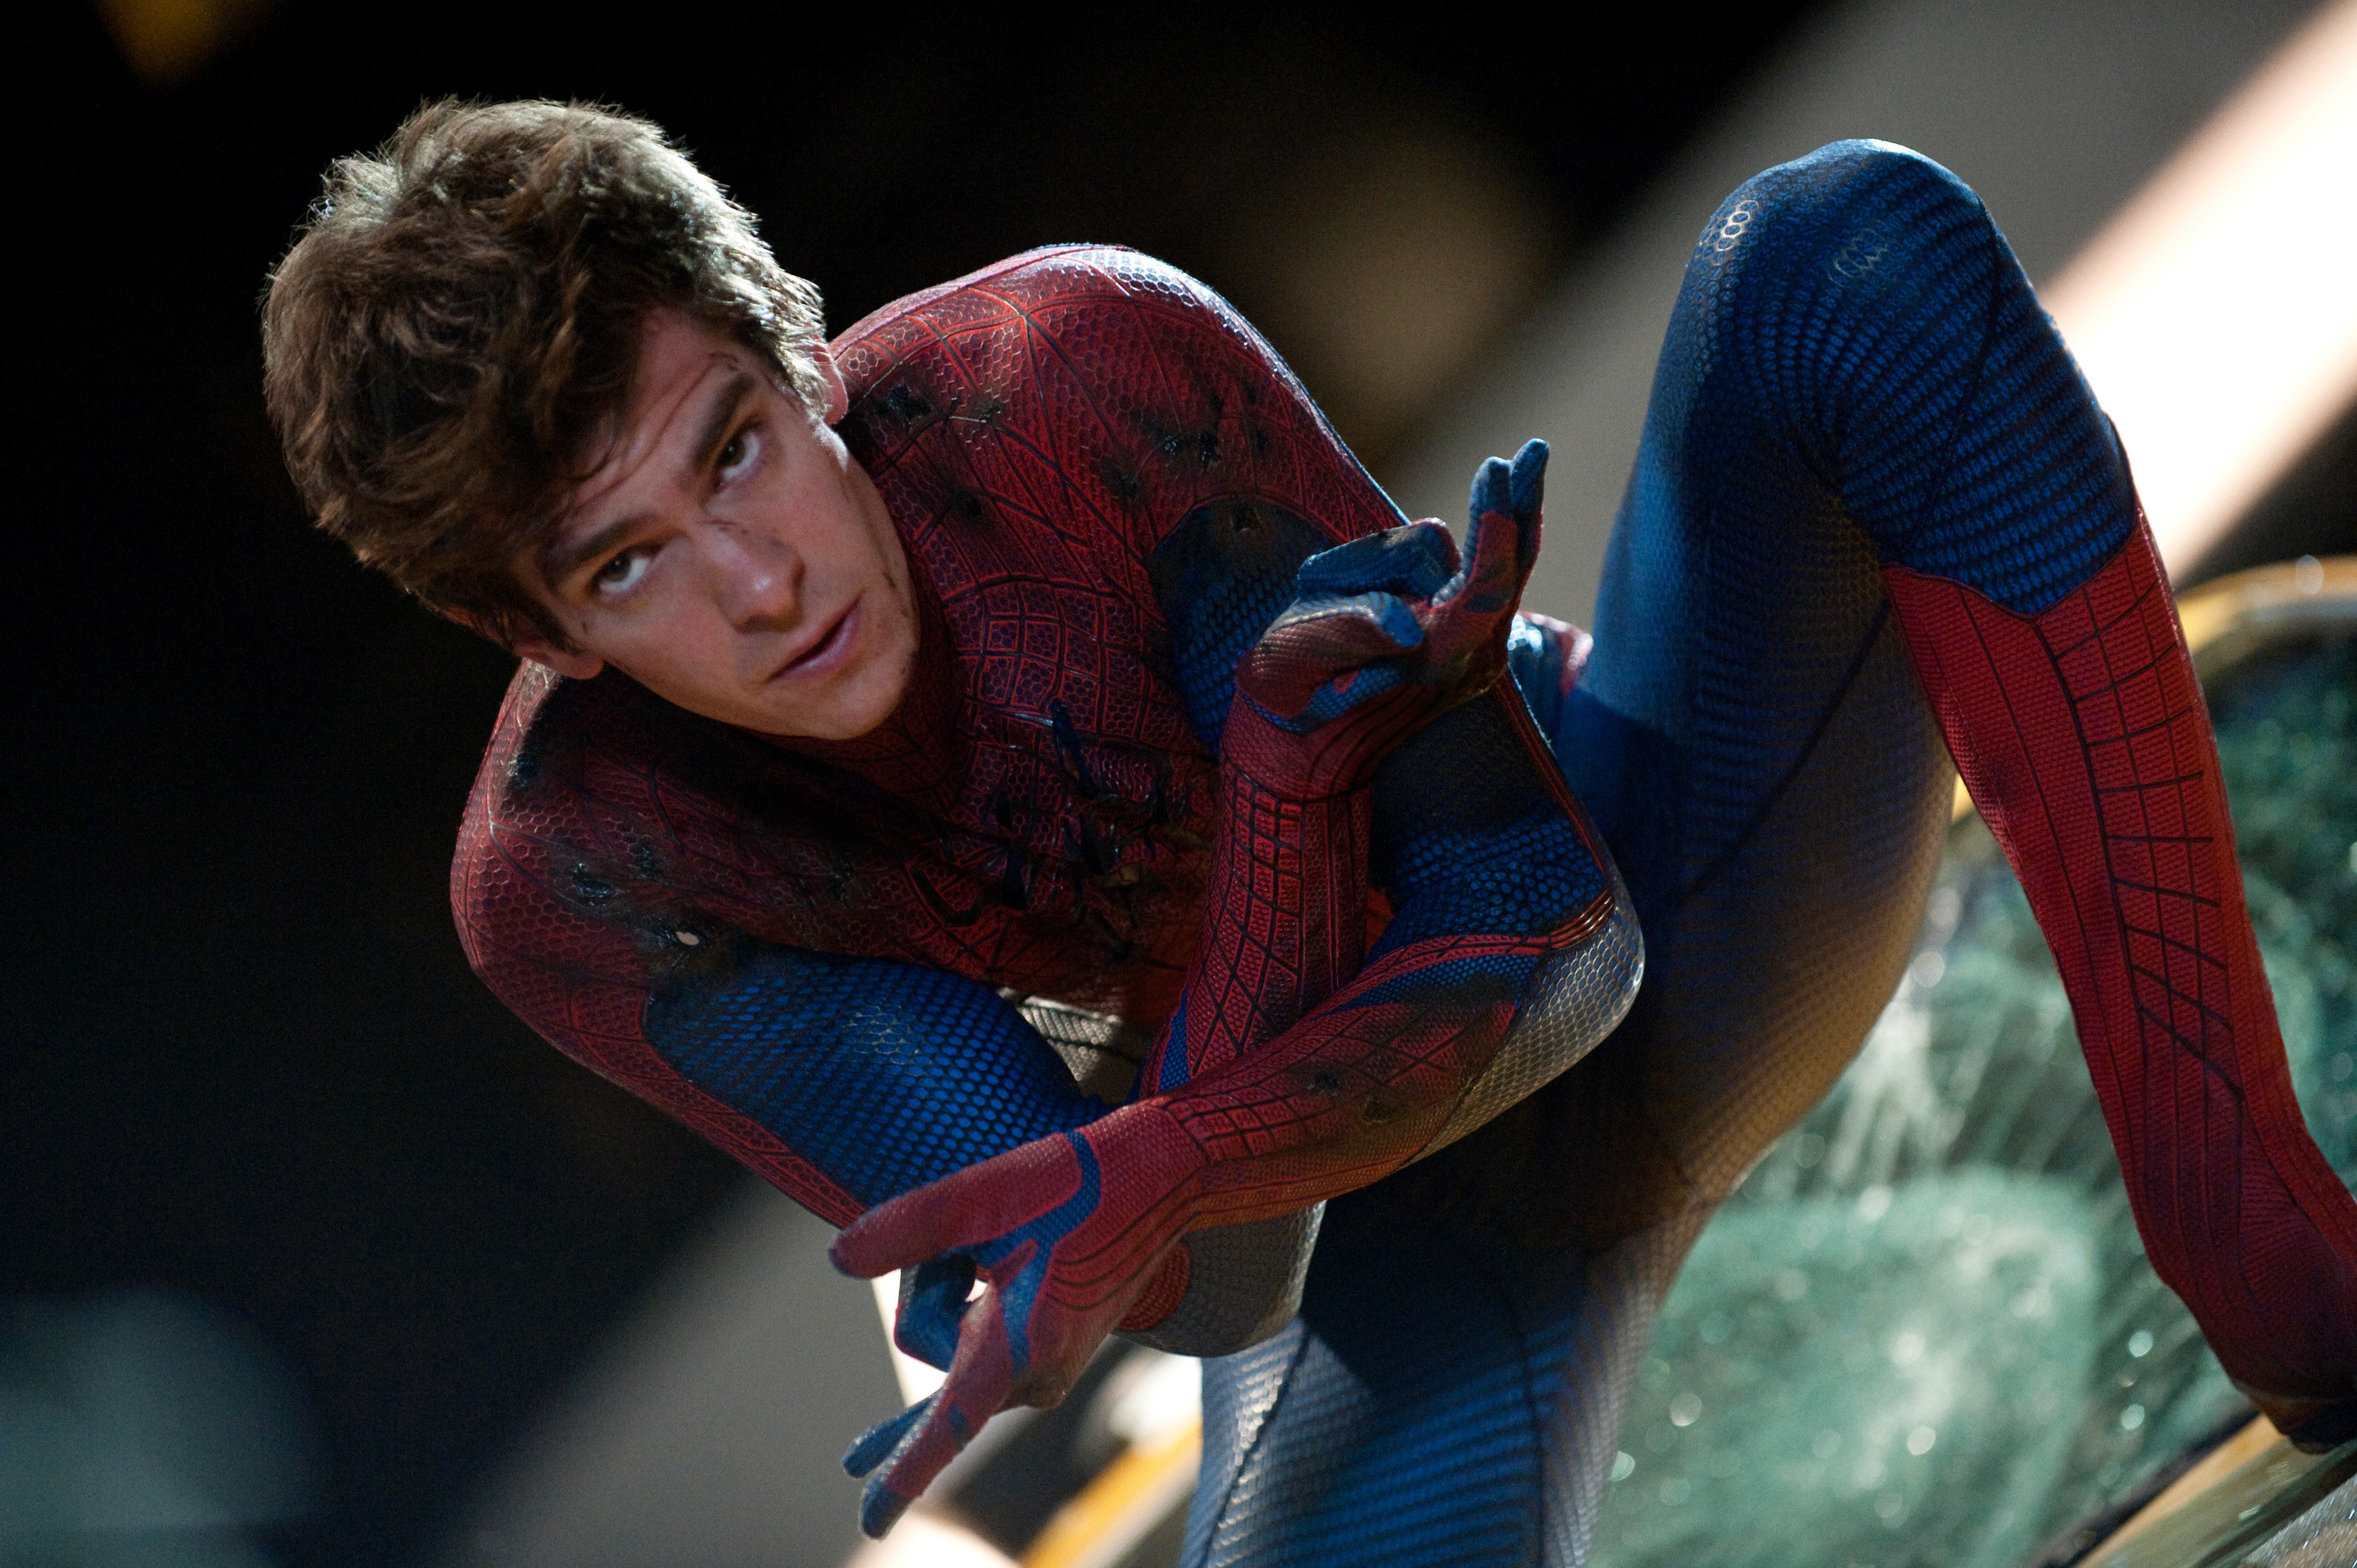 Andrew Garfield in a Spider-Man suit